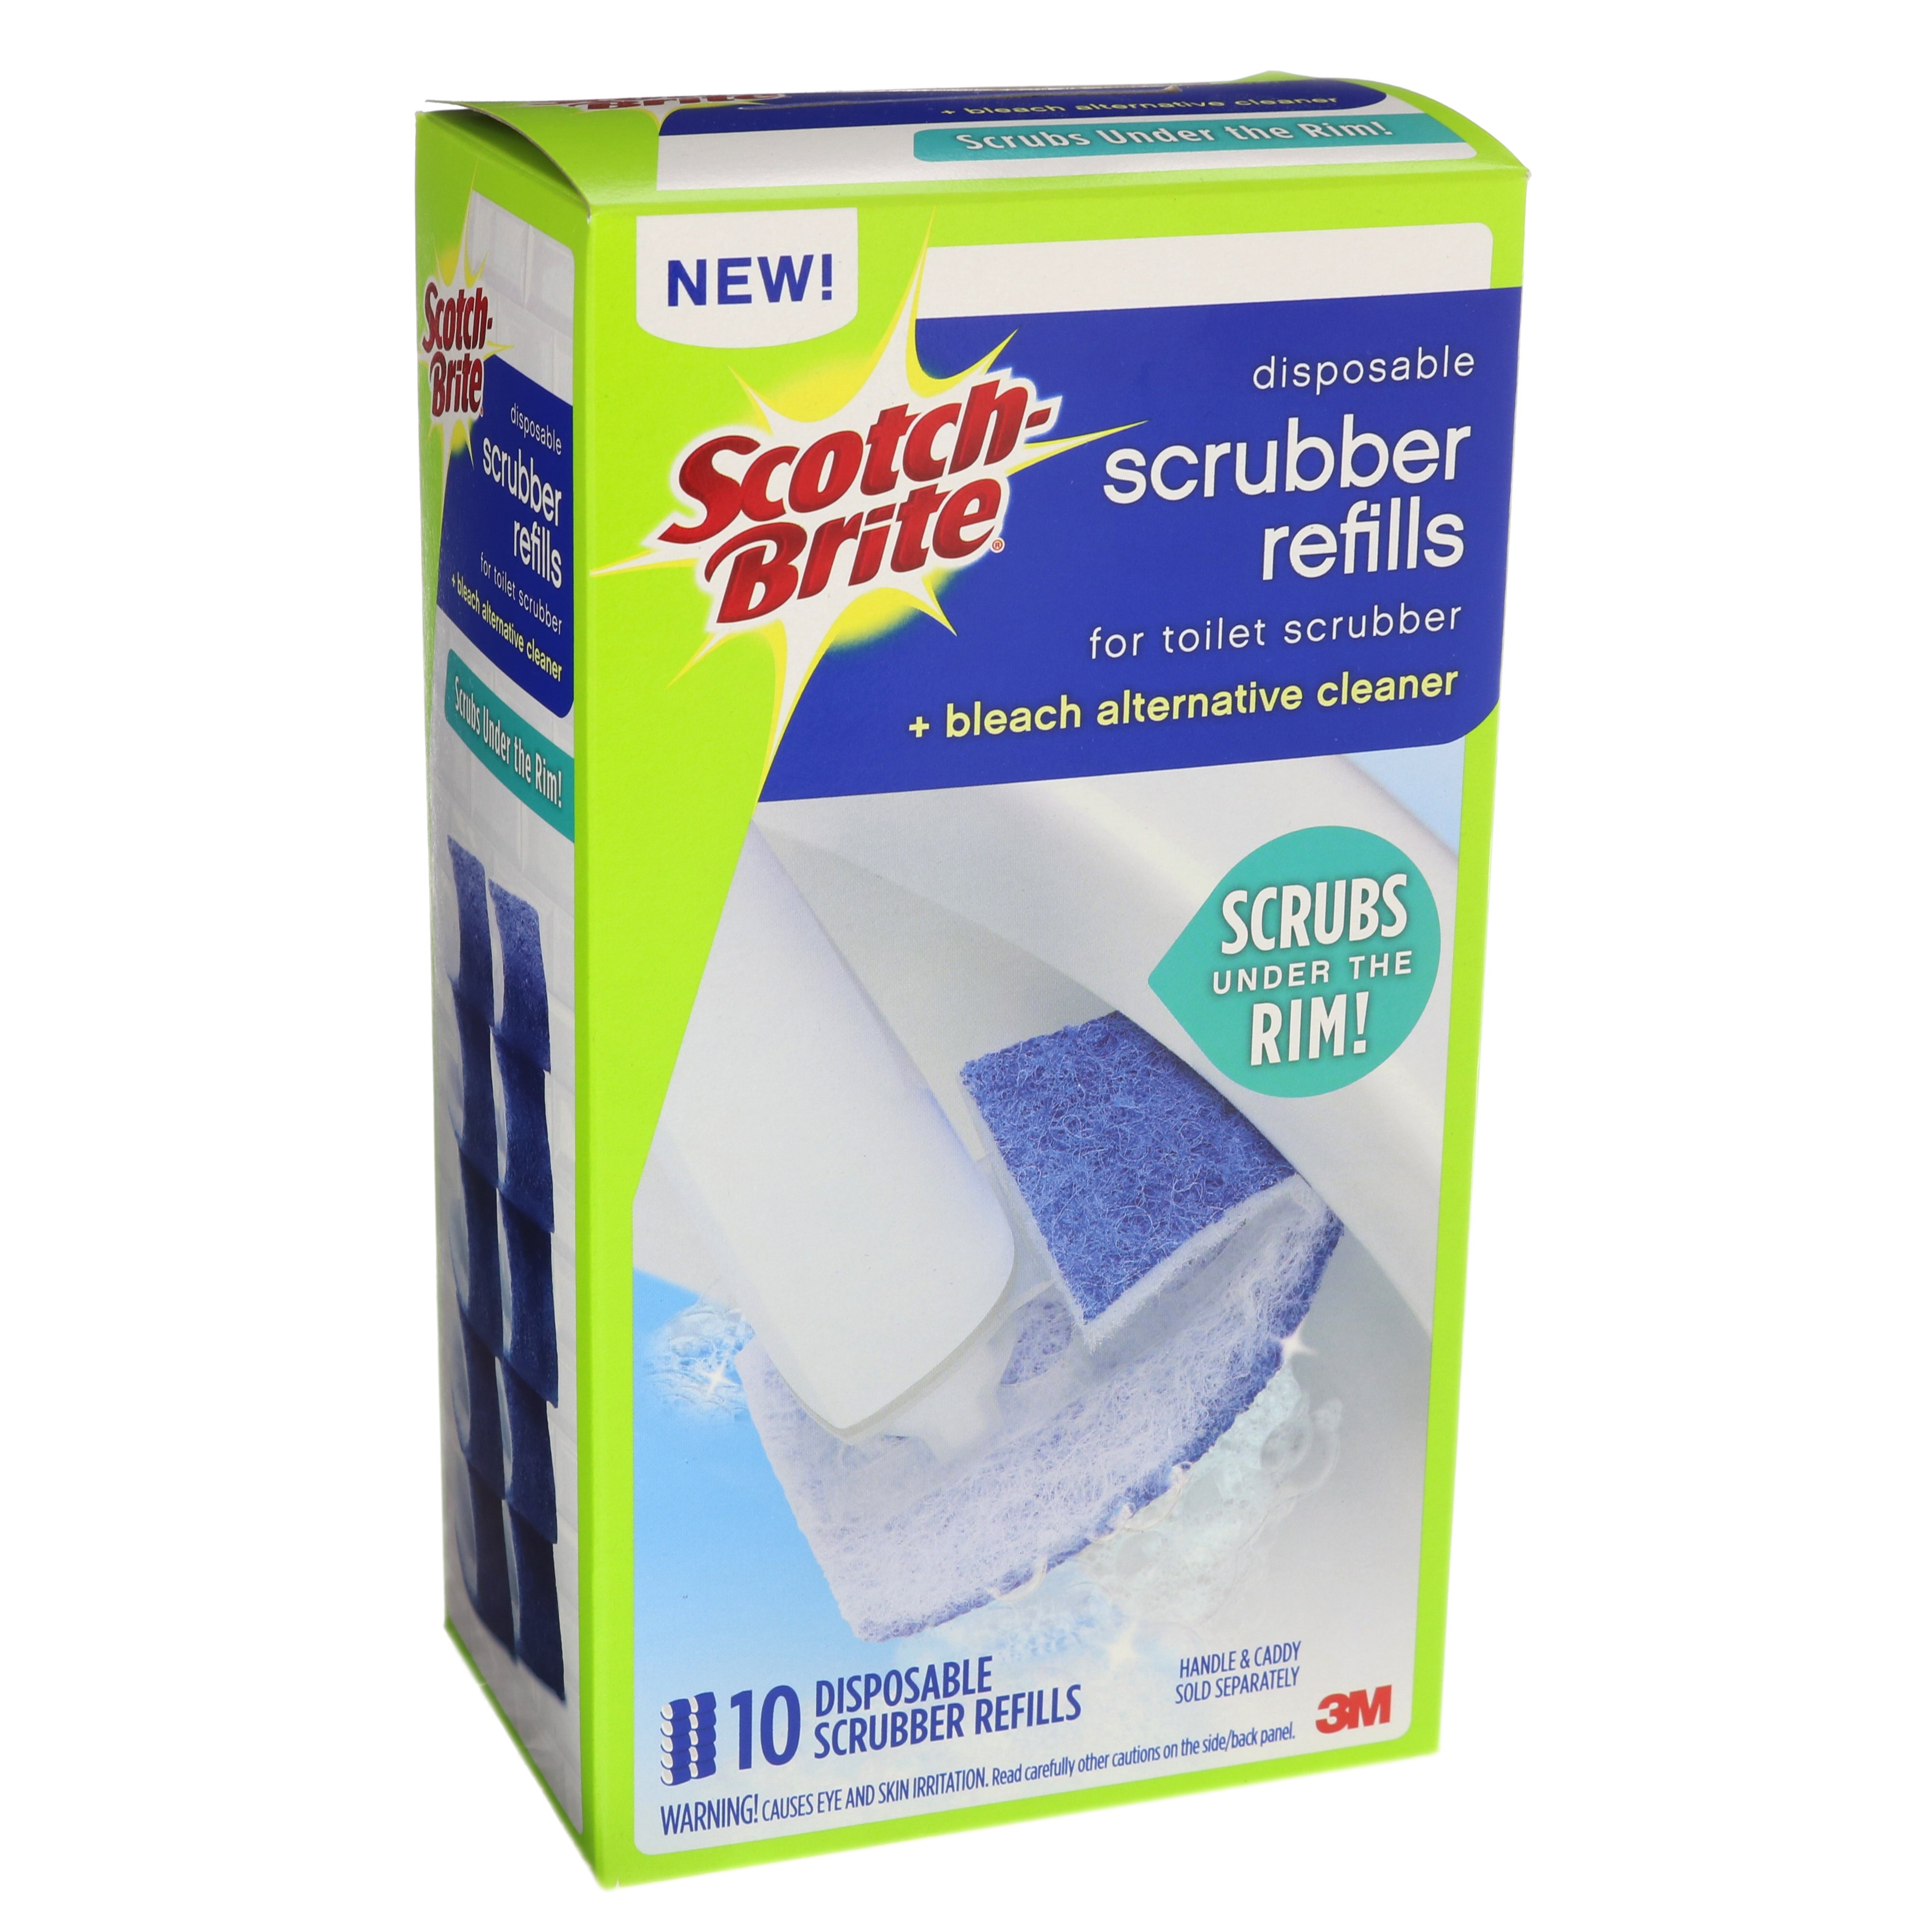 Scotch-Brite Disposable Toilet Scrubber Cleaning System